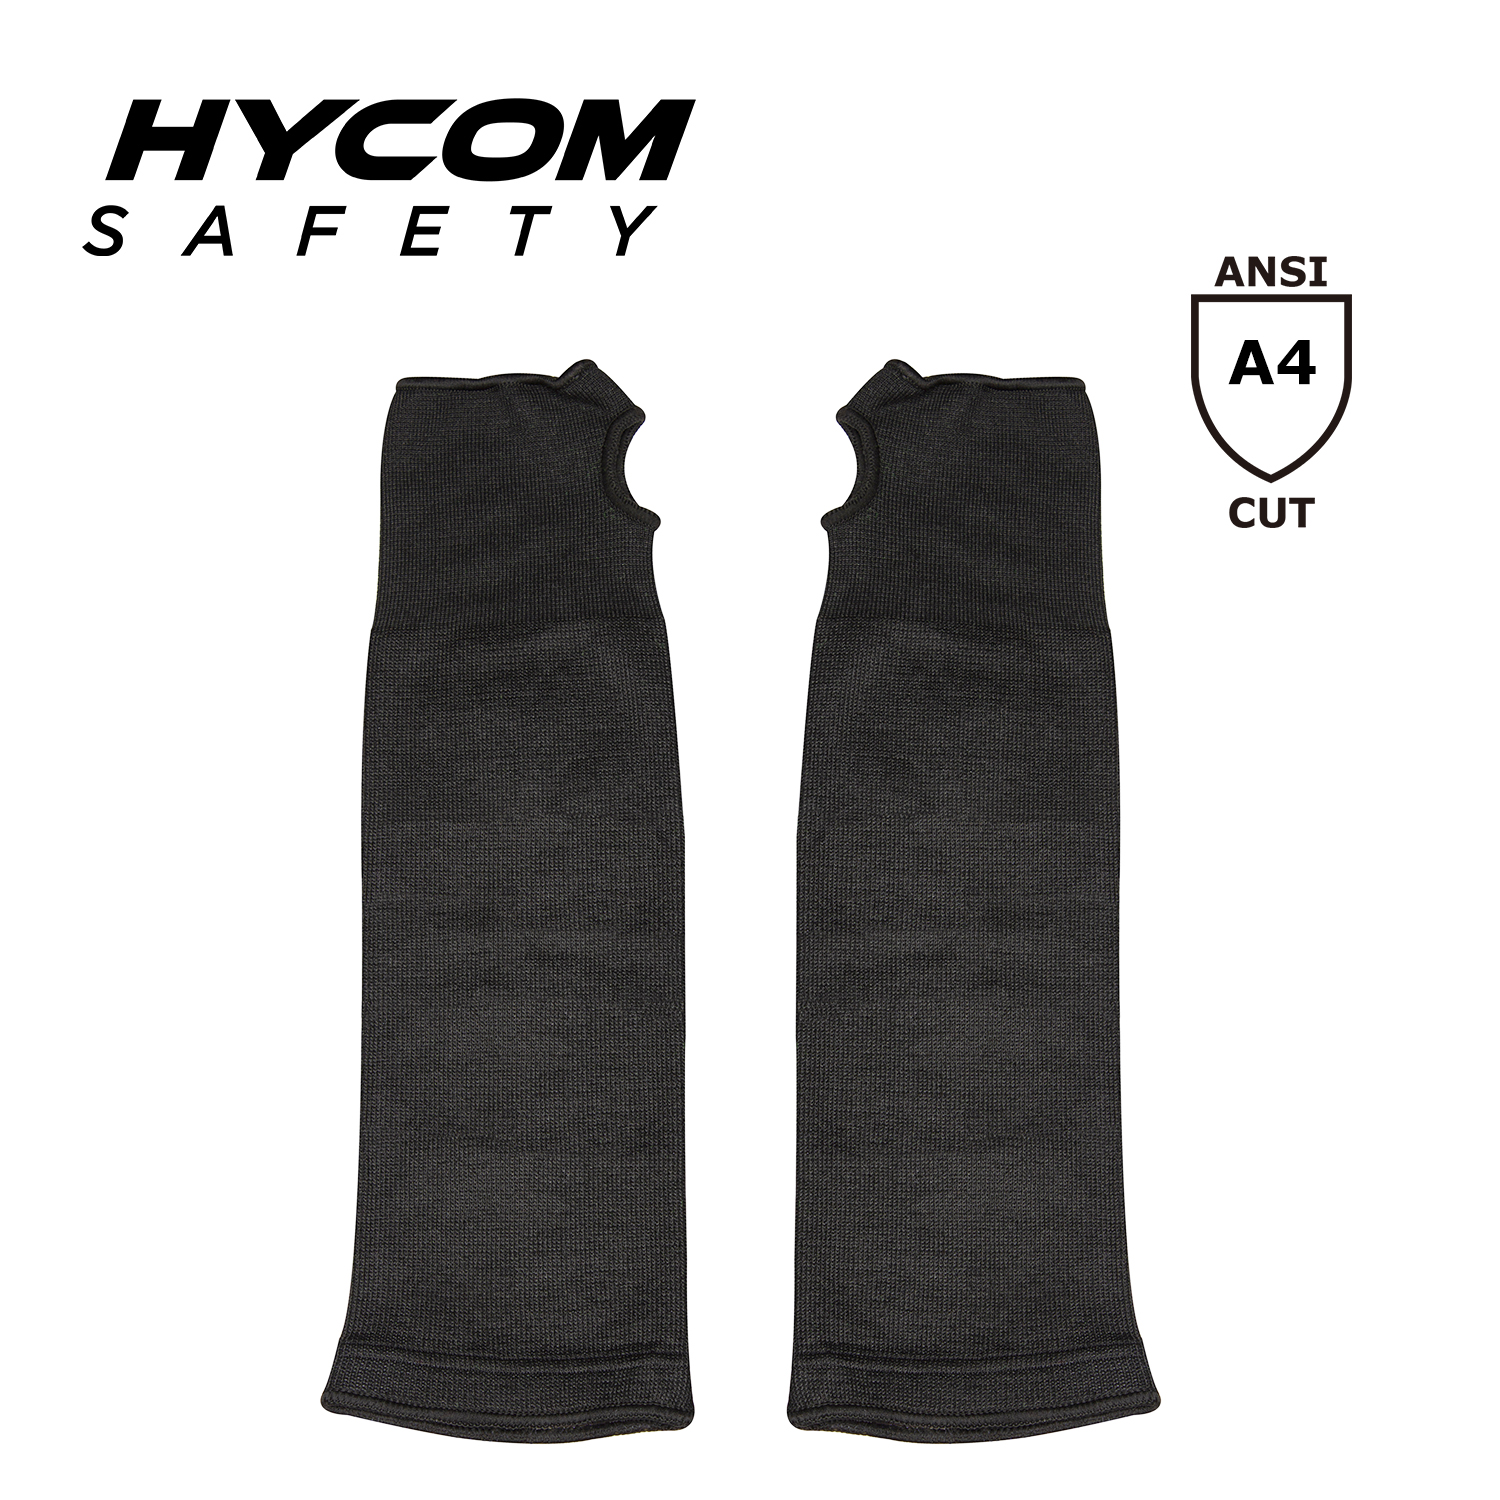 HYCOM Cut Level 4 Cut Resistant Arm Cover Sleeve with Thumb Slot For Work Safety